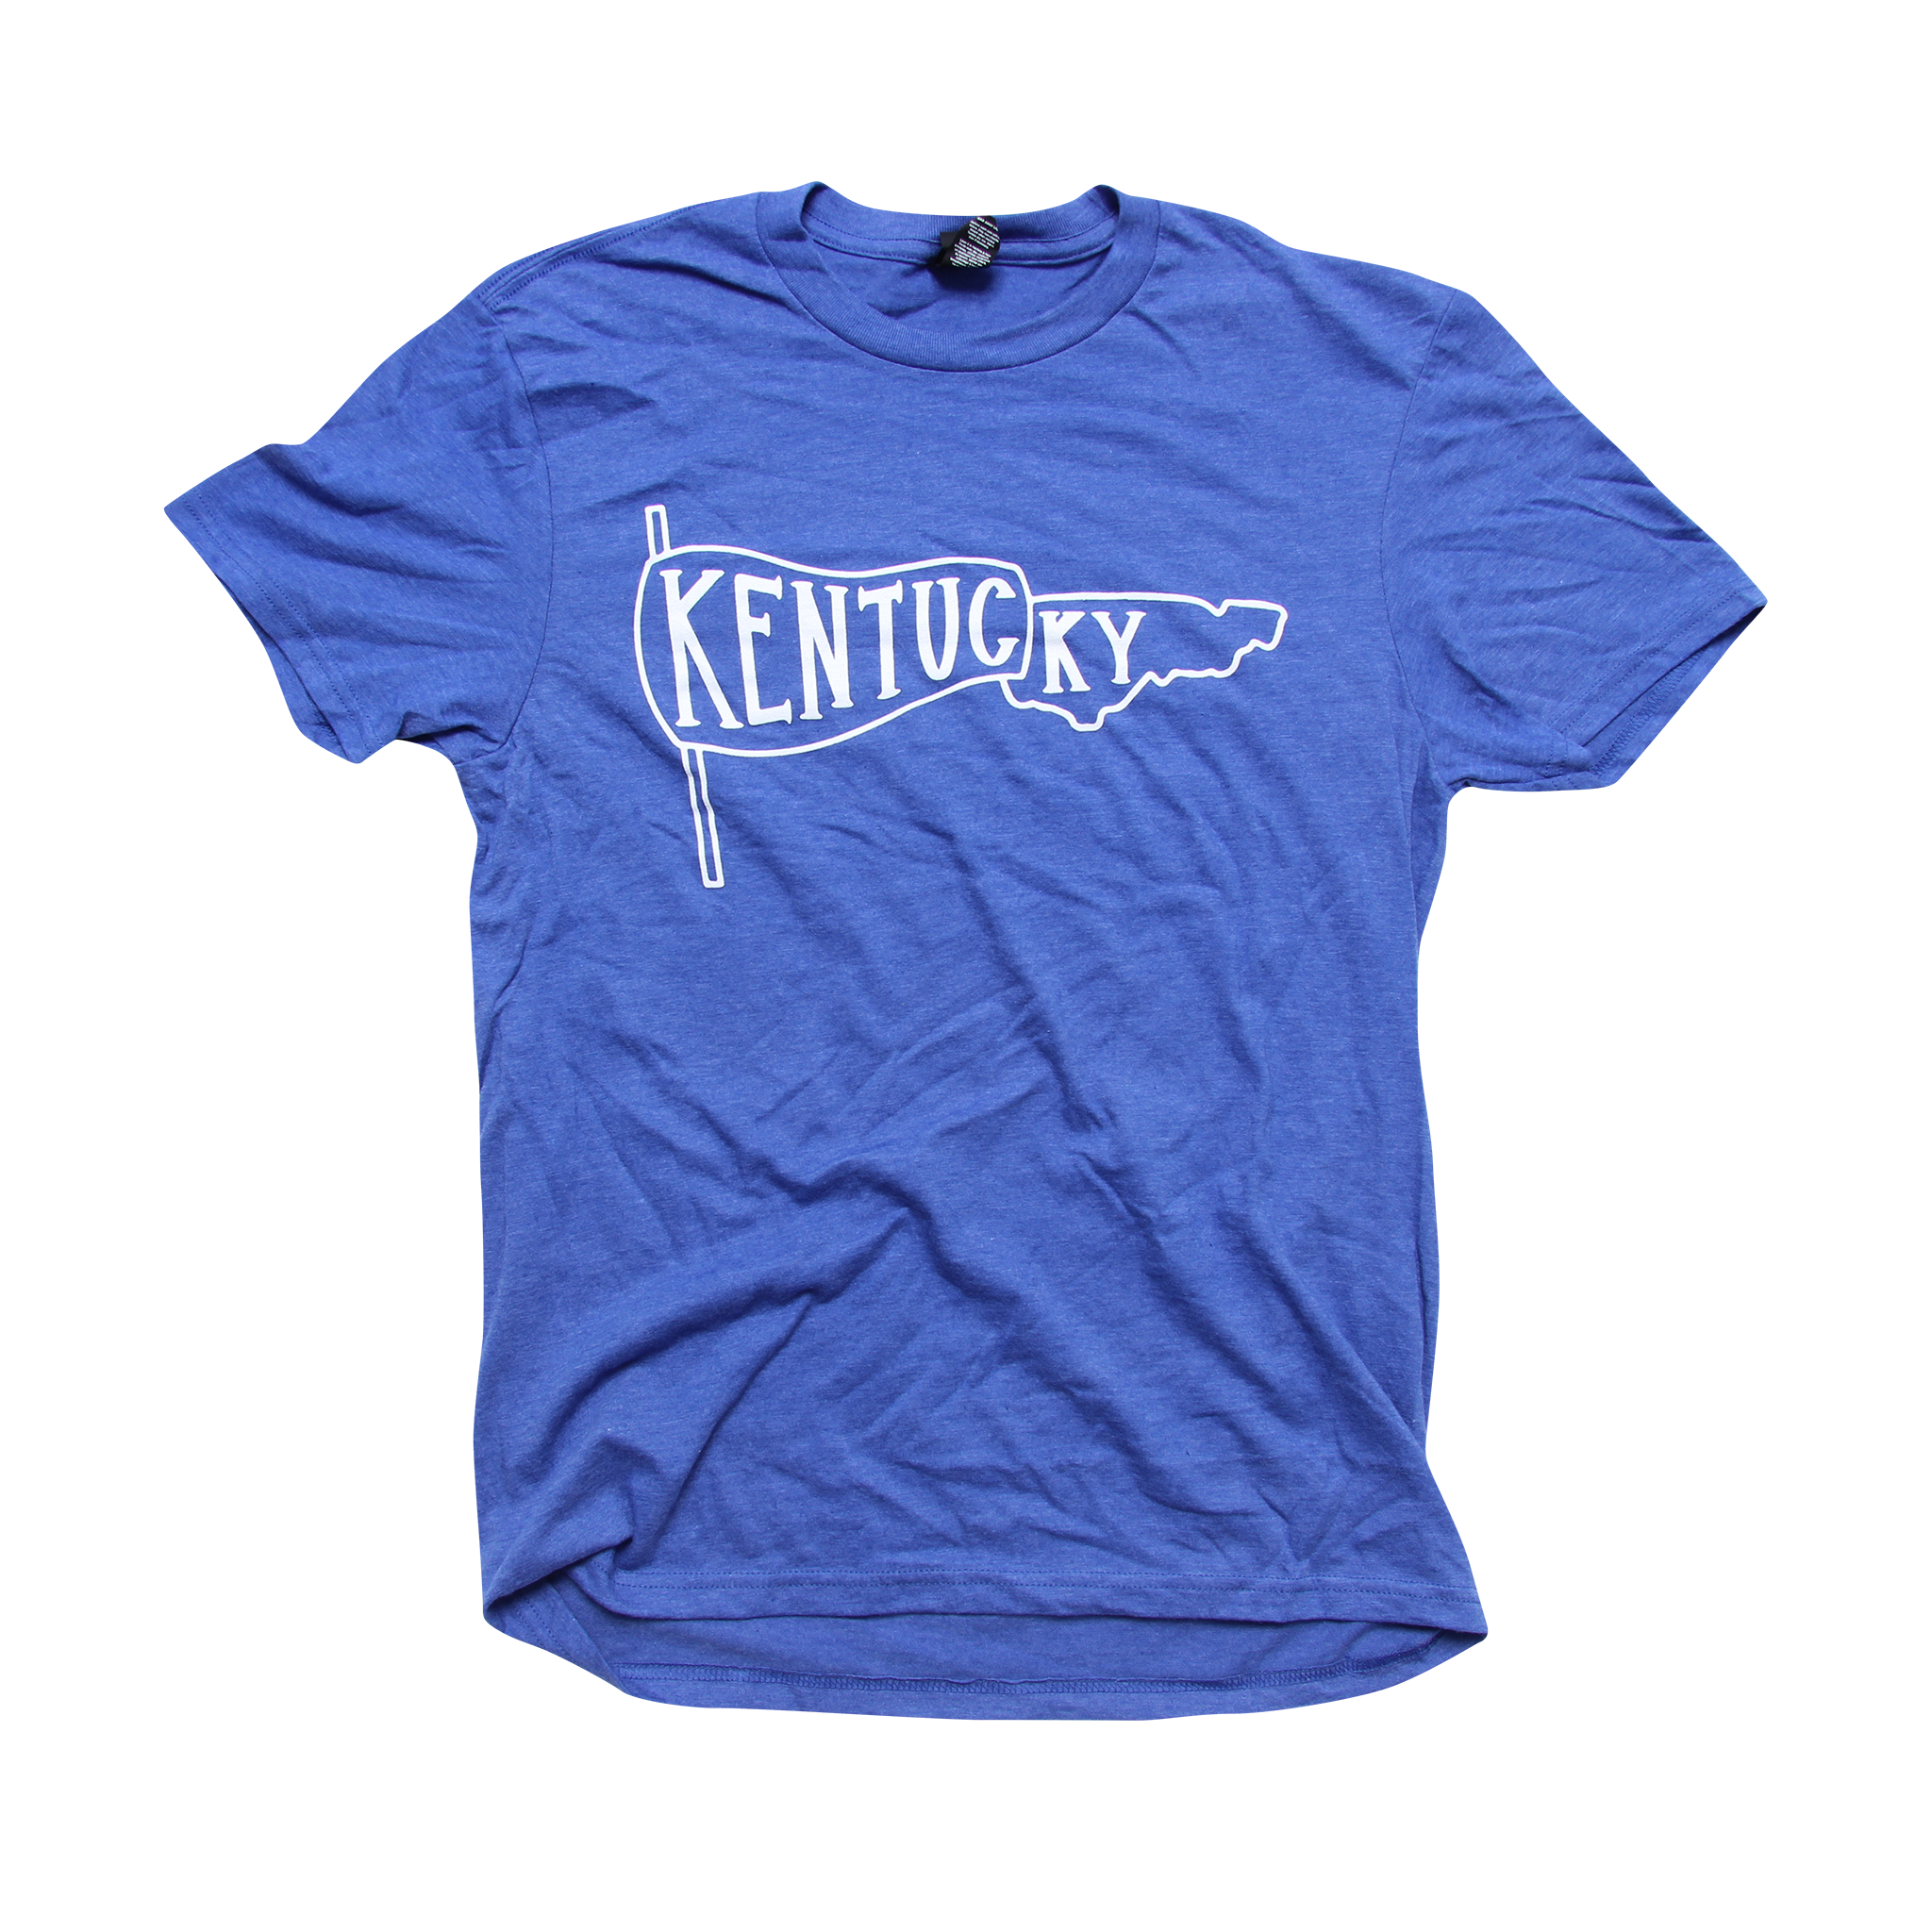 State of Kentucky Pennant T-Shirt - Barrel Down South